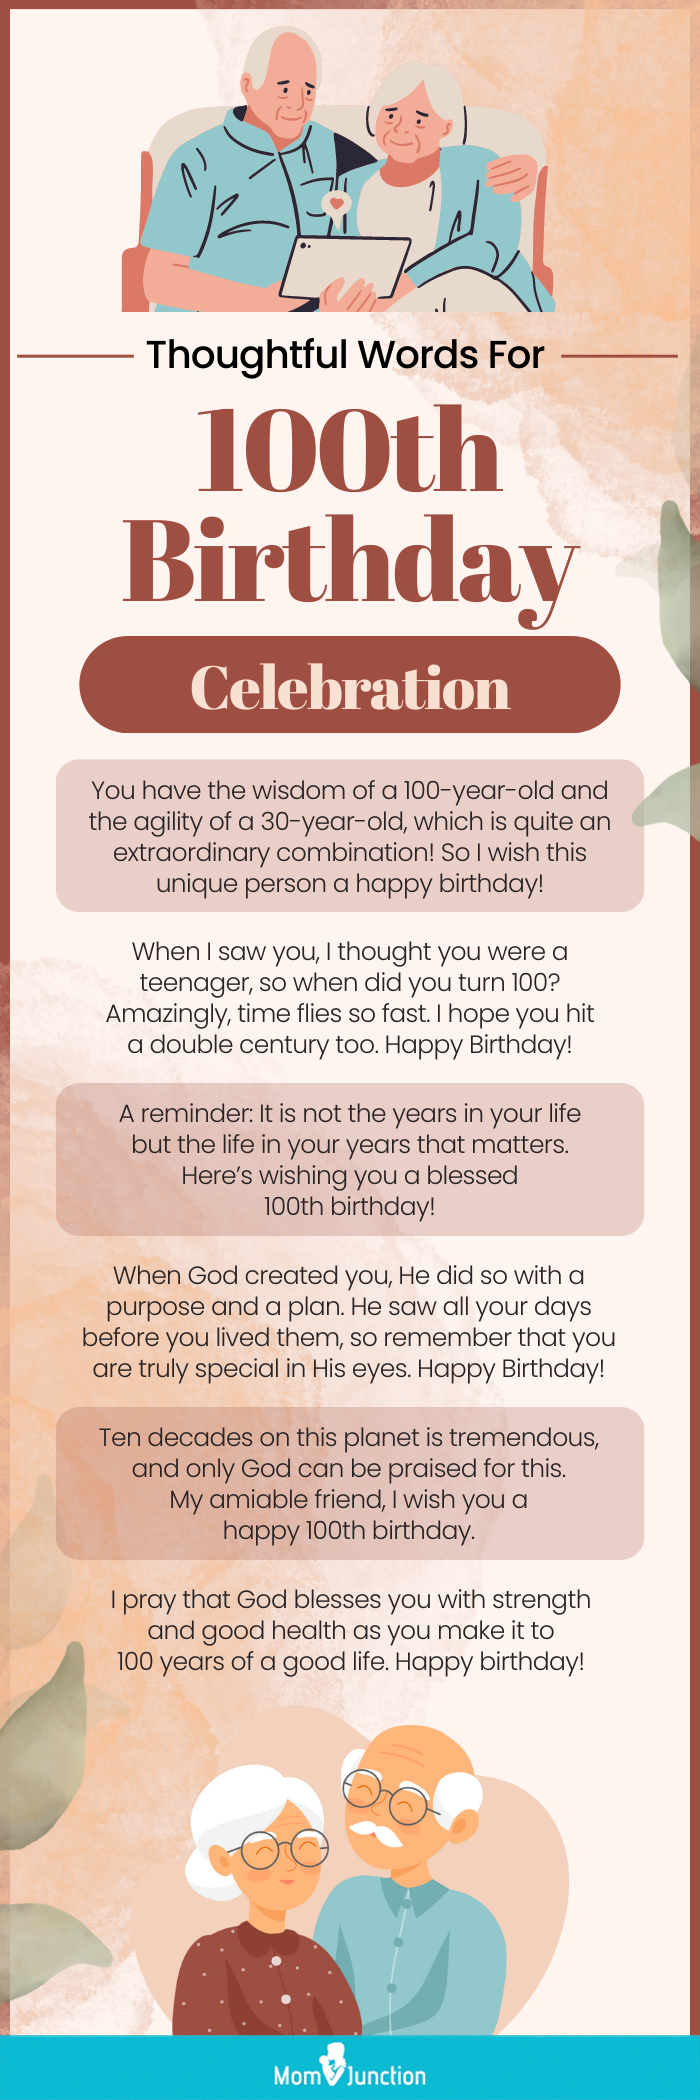 thoughtful words for 100th birthday celebration (infographic)